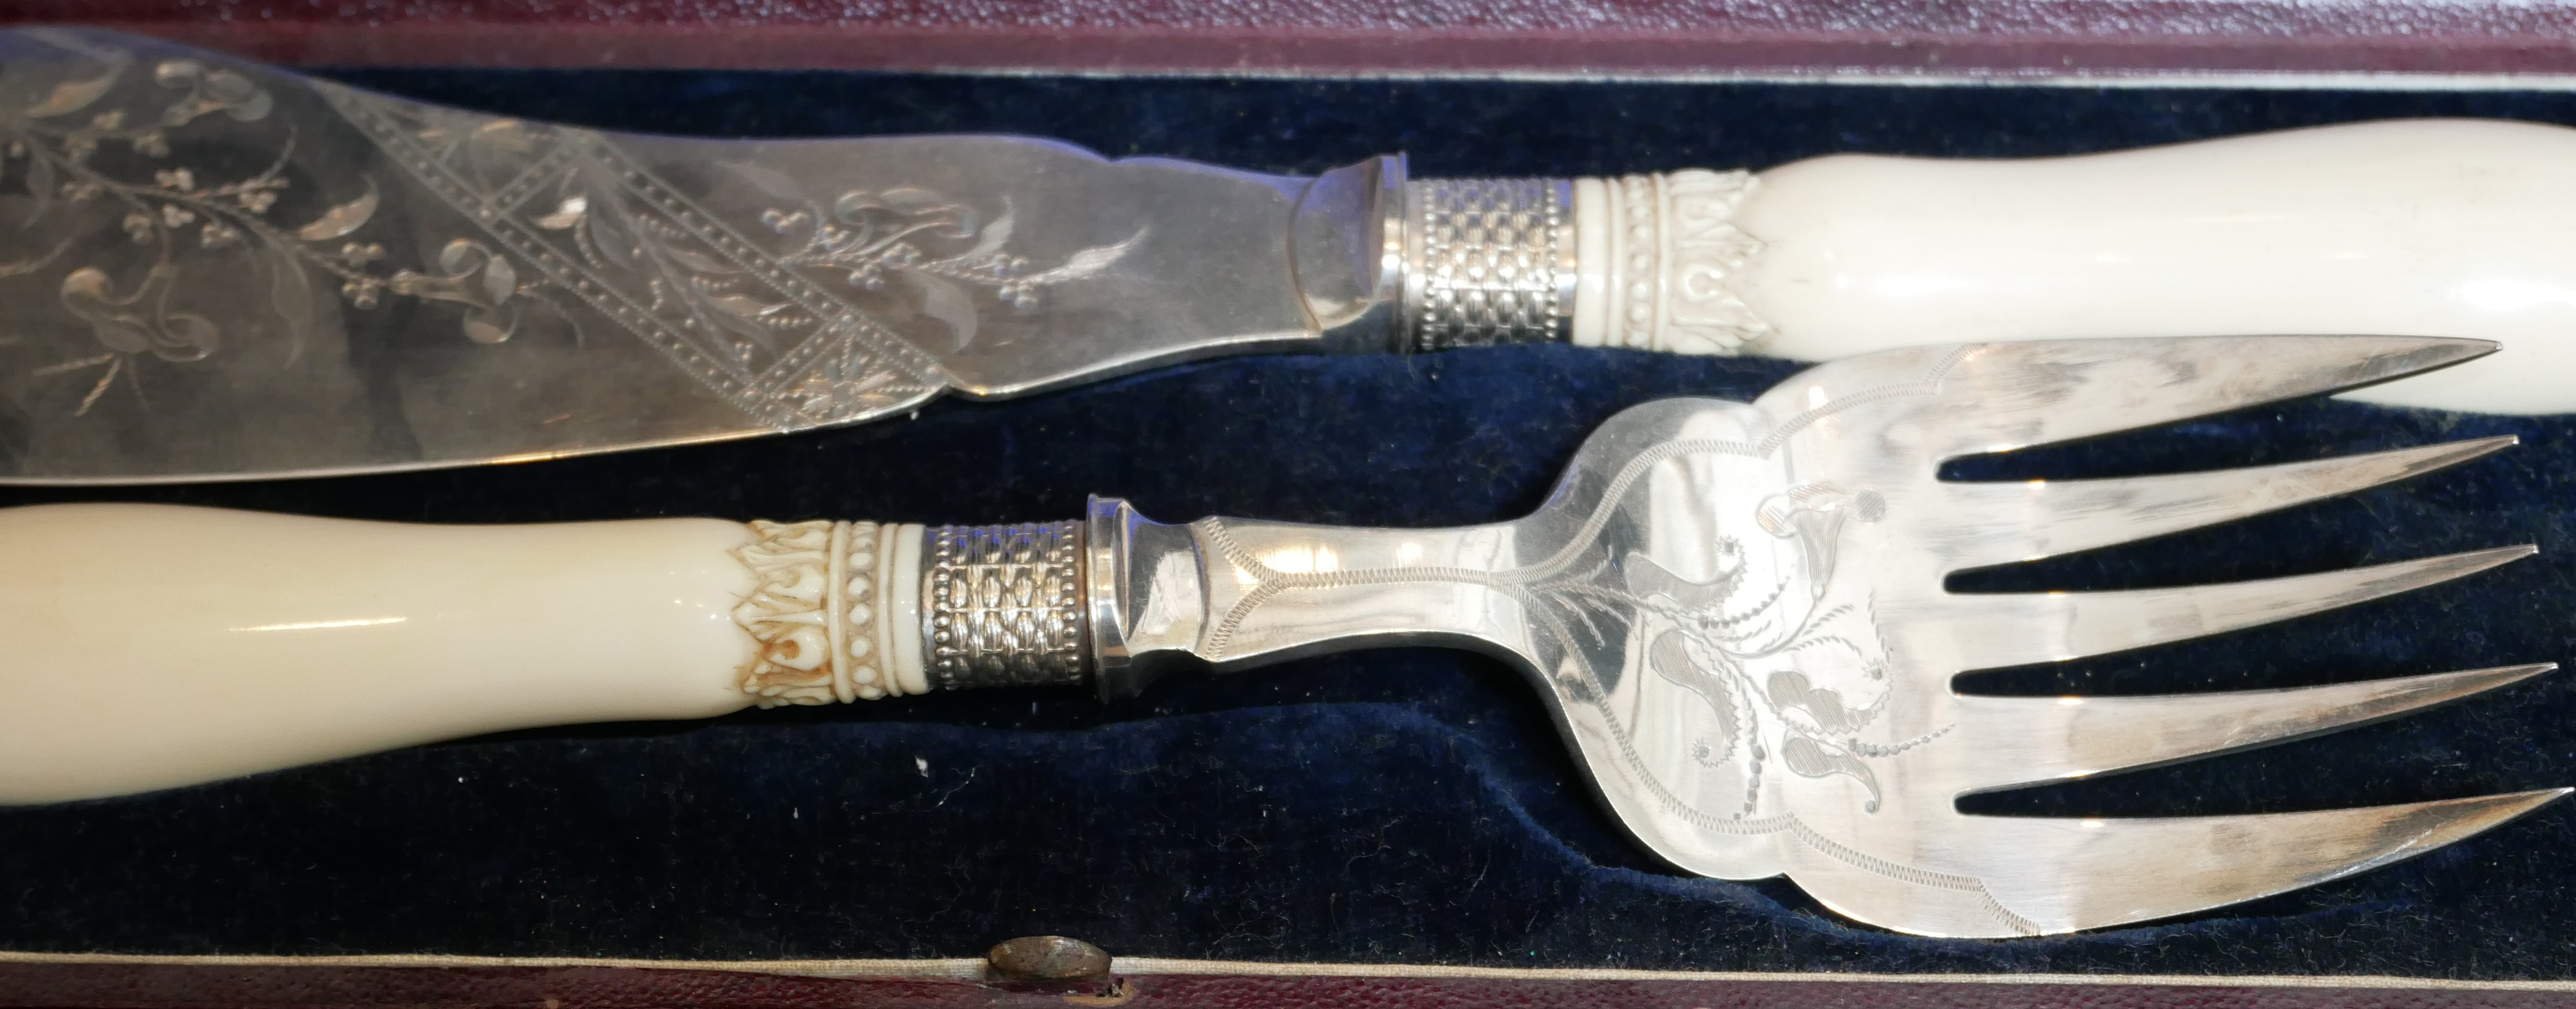 A CASED PAIR OF VICTORIAN SILVER PLATE AND IVORY FISH SERVERS Aesthetic form with engraved floral - Image 2 of 2